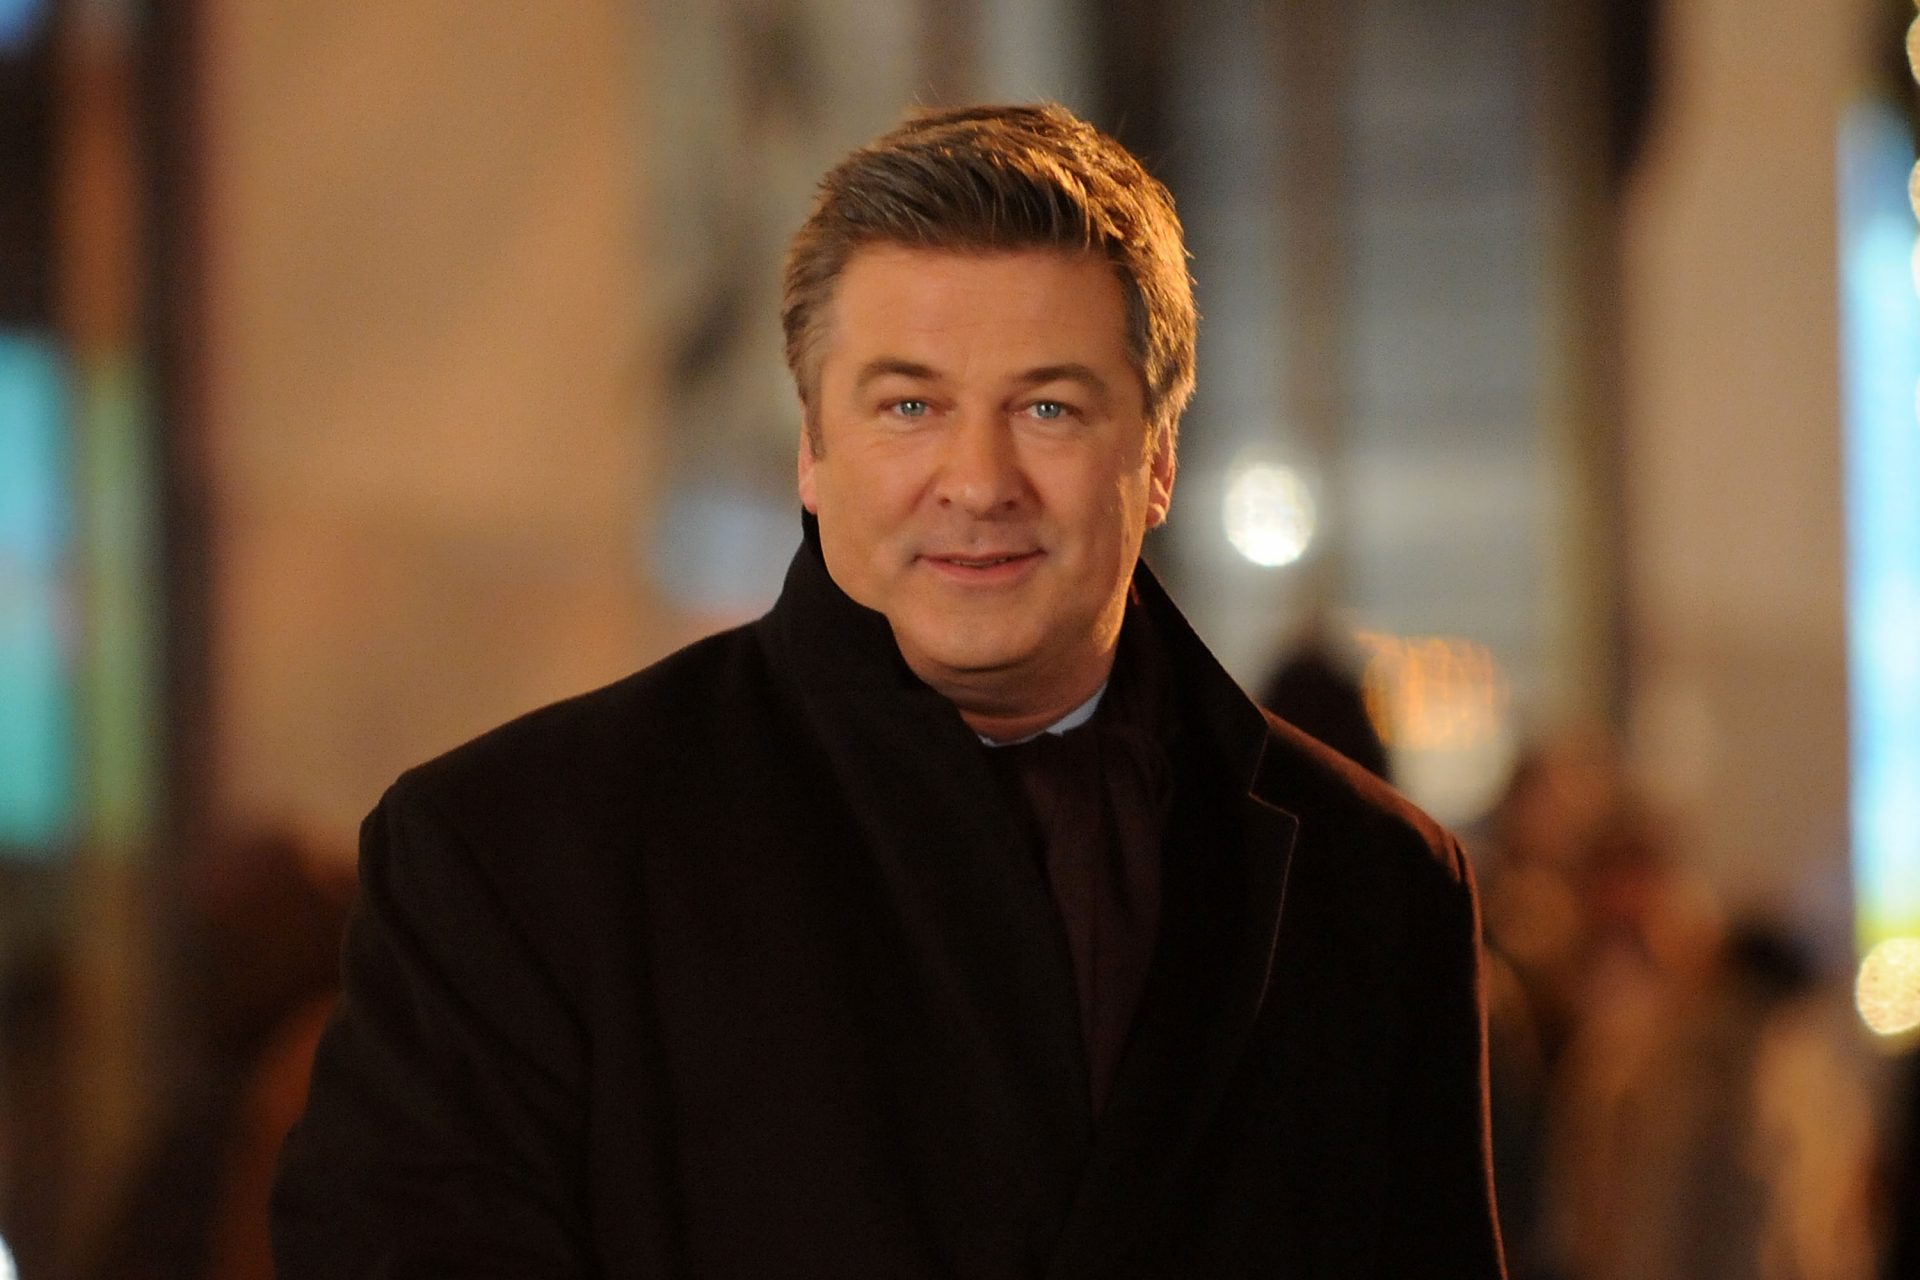 Alec Baldwin wins the title of celebrity who has hosted the most